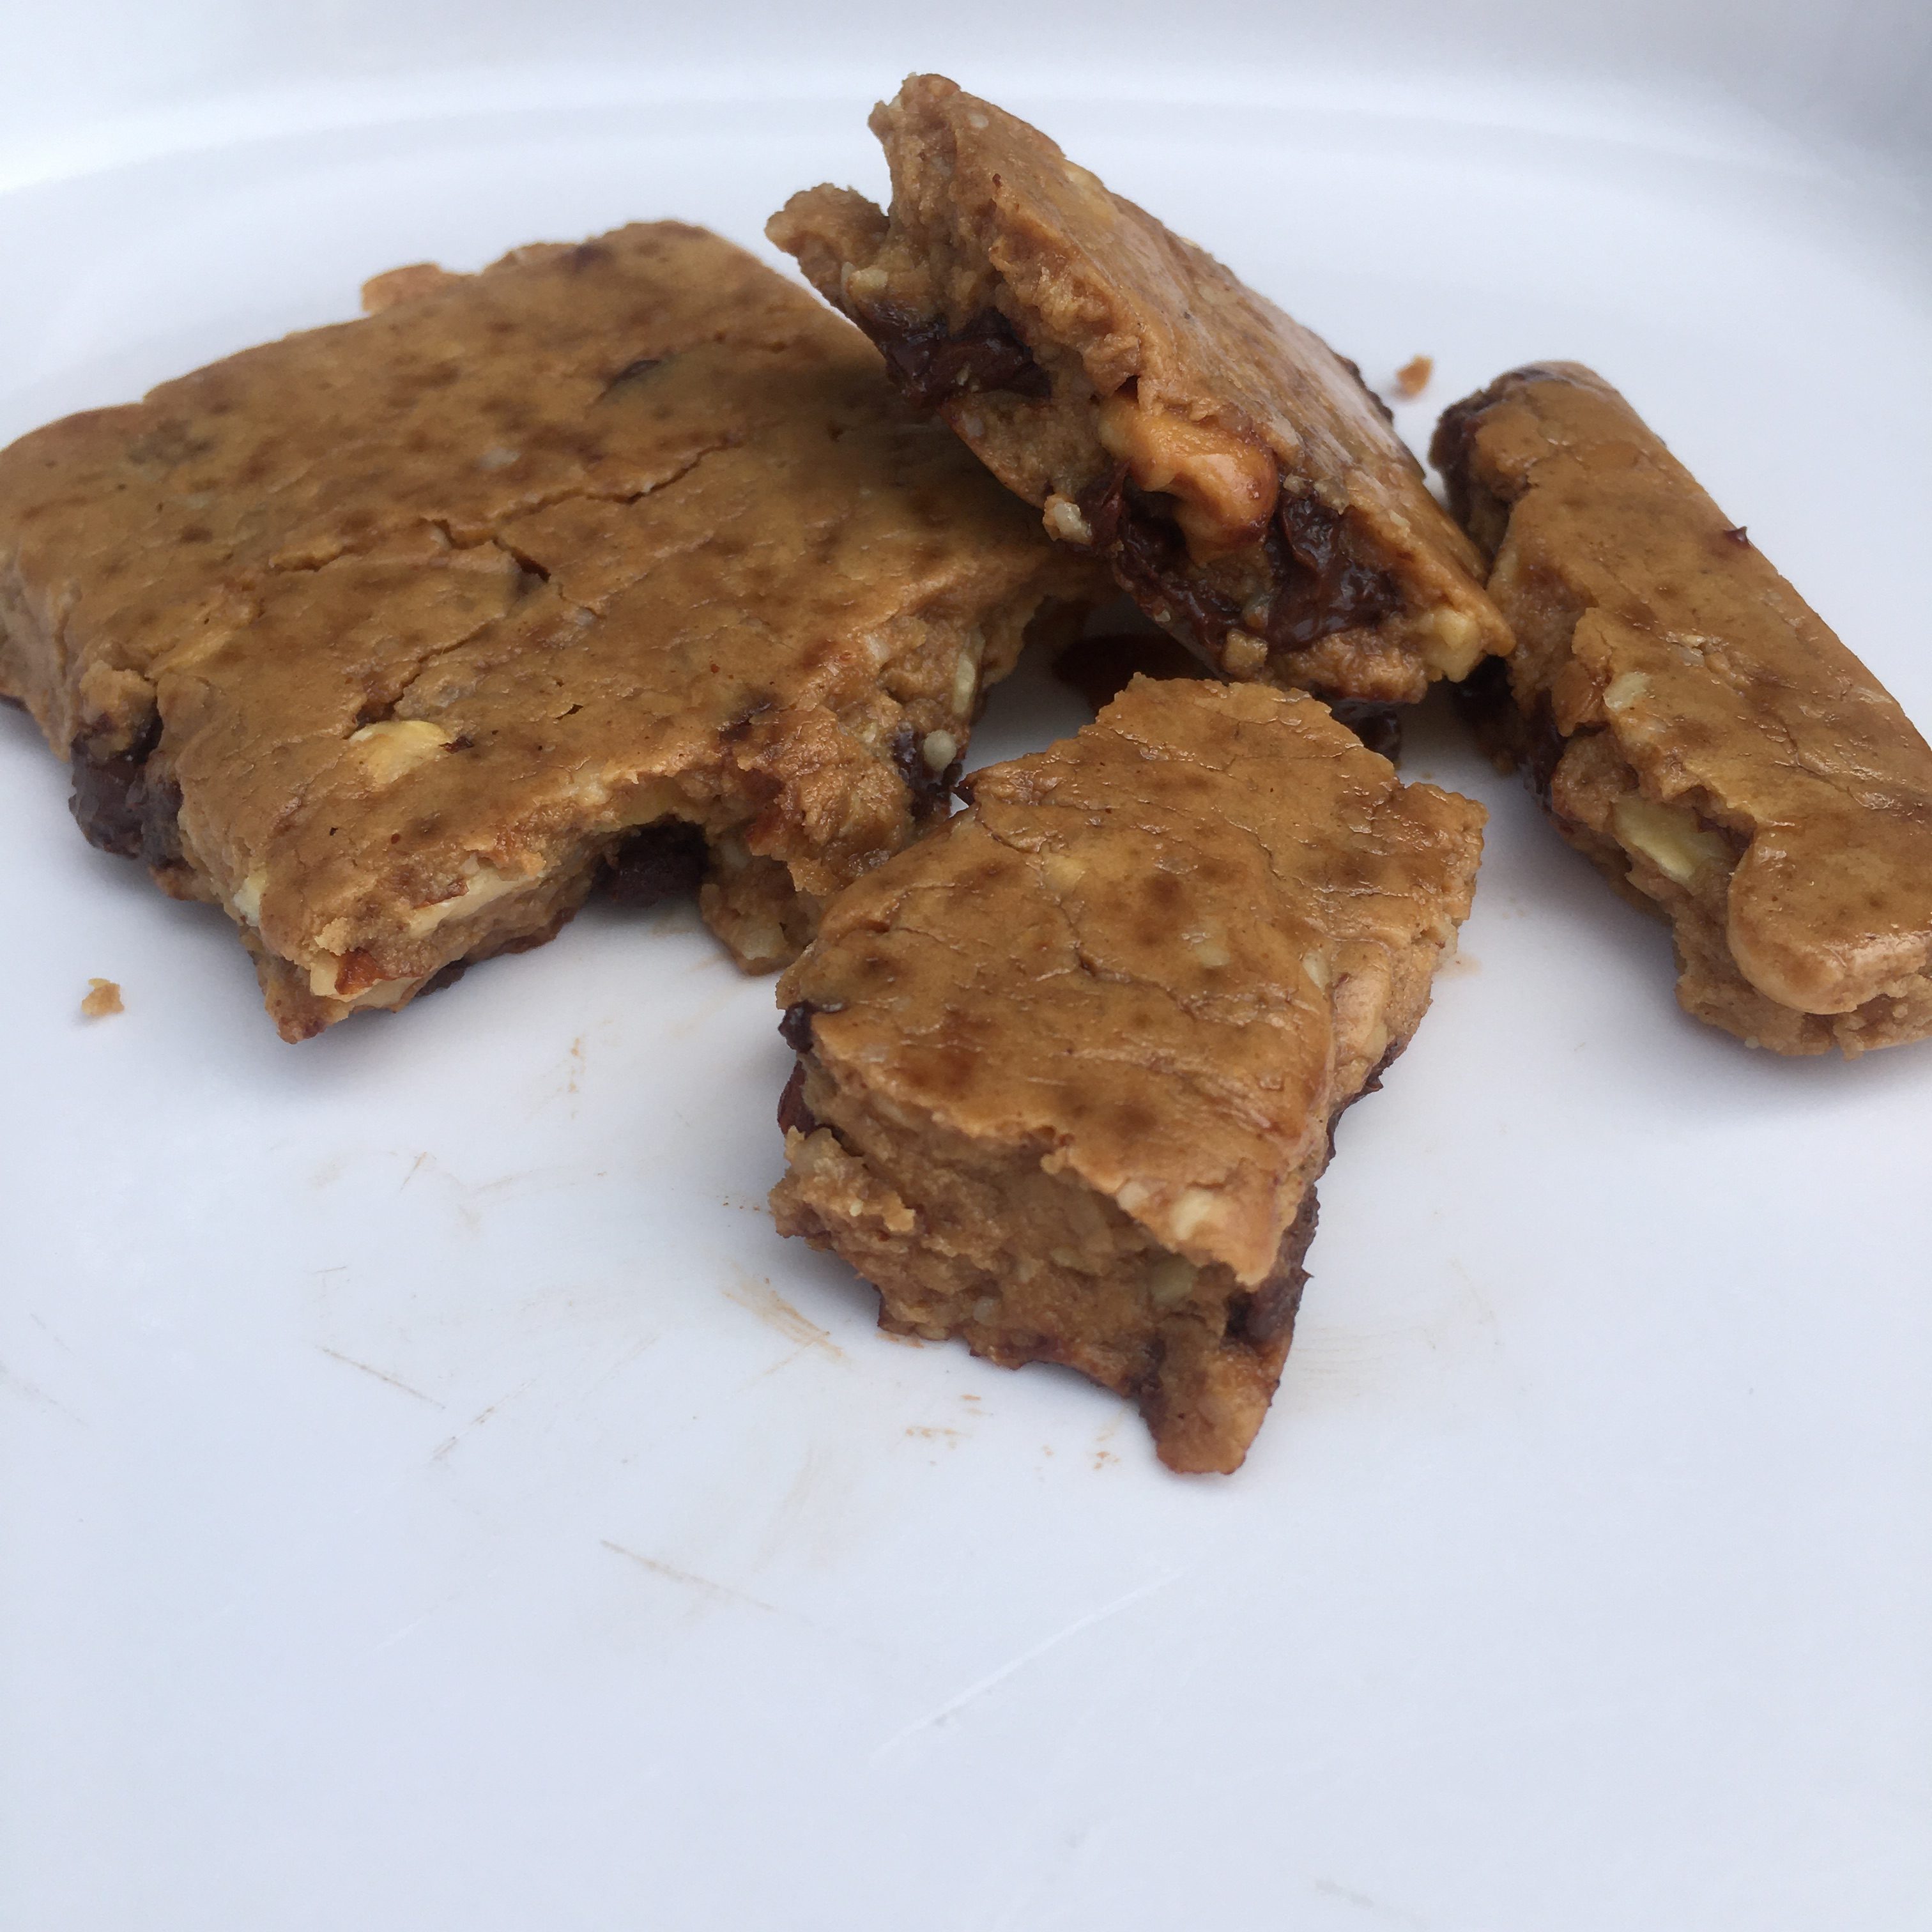 Cairn August 2020 keto trail snack